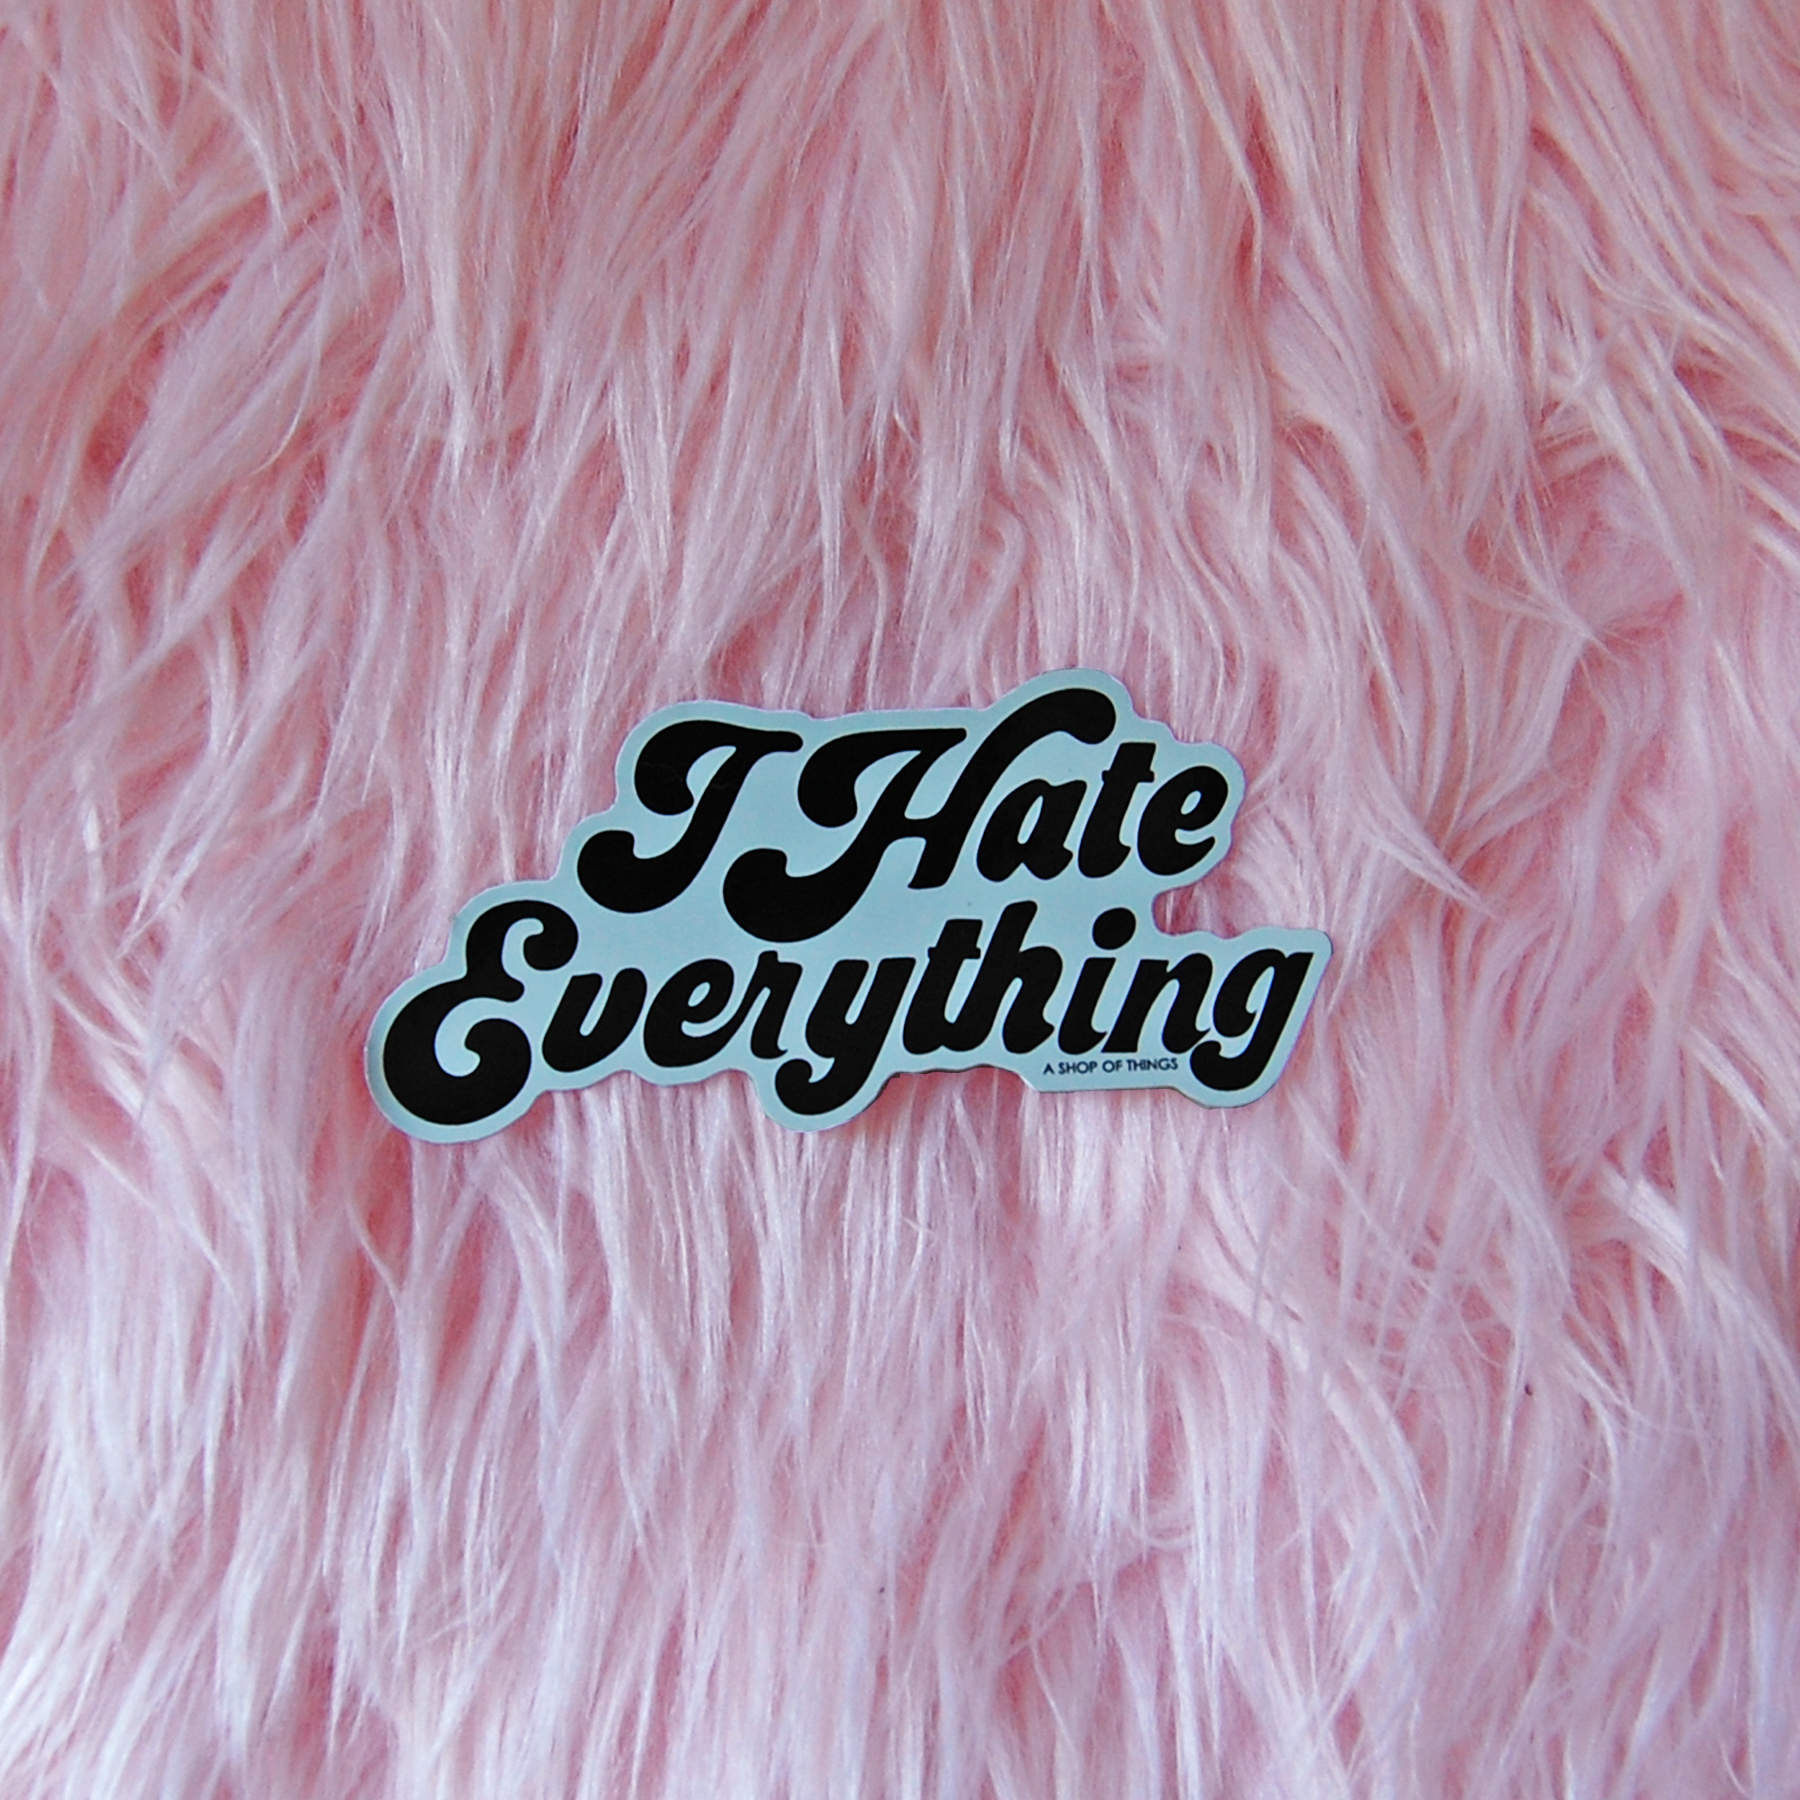 I Hate Everything sticker – A Shop of Things